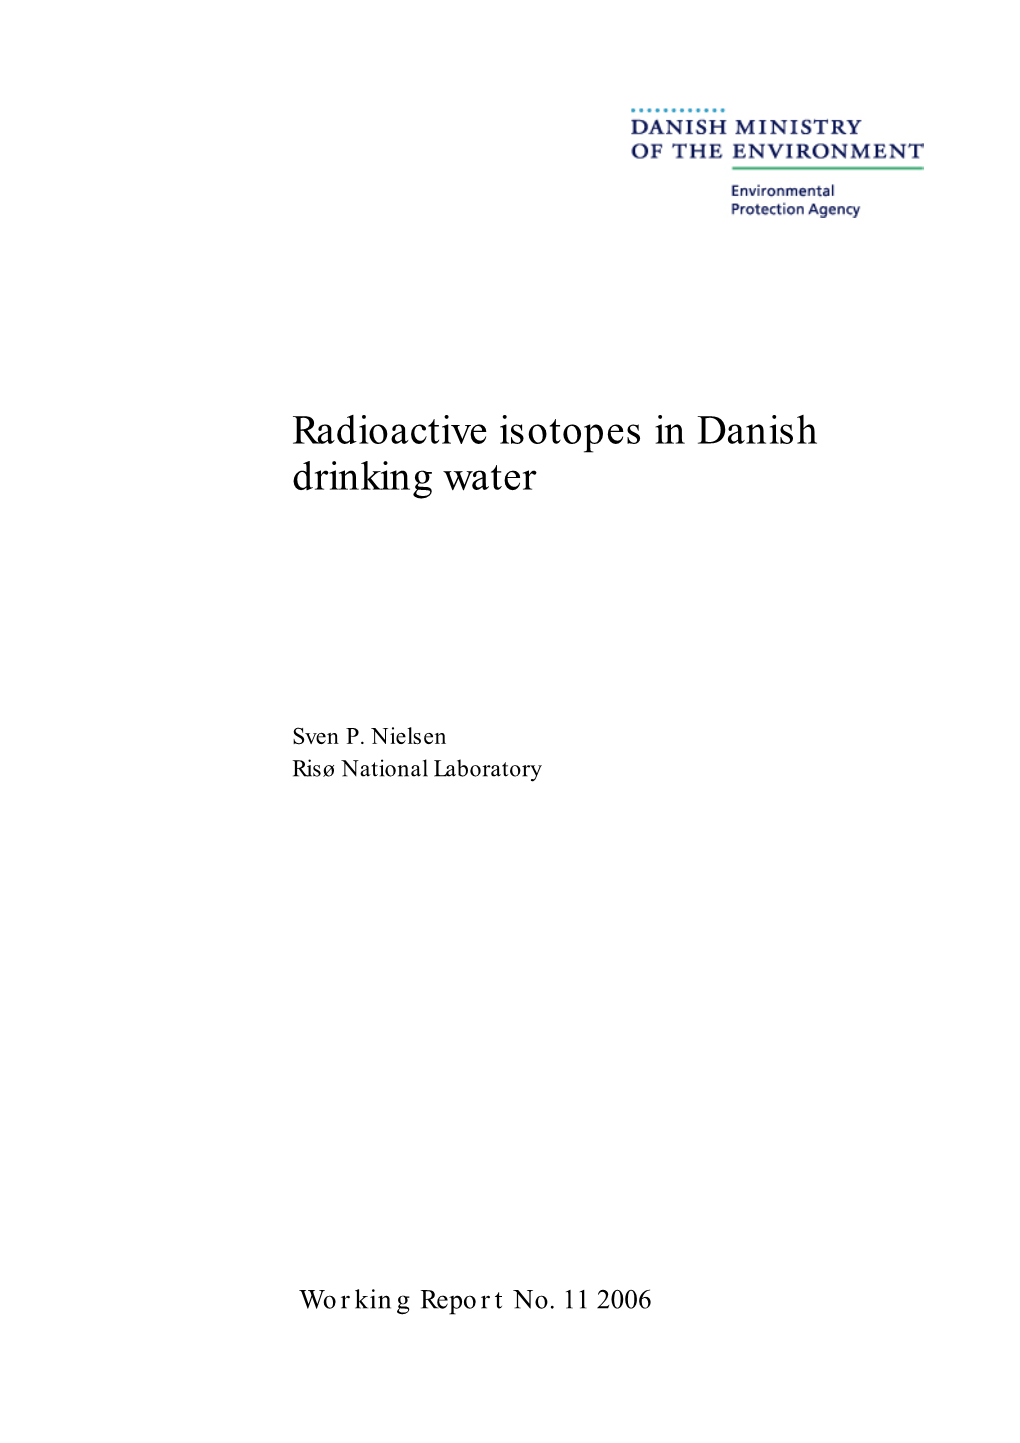 Radioactive Isotopes in Danish Drinking Water